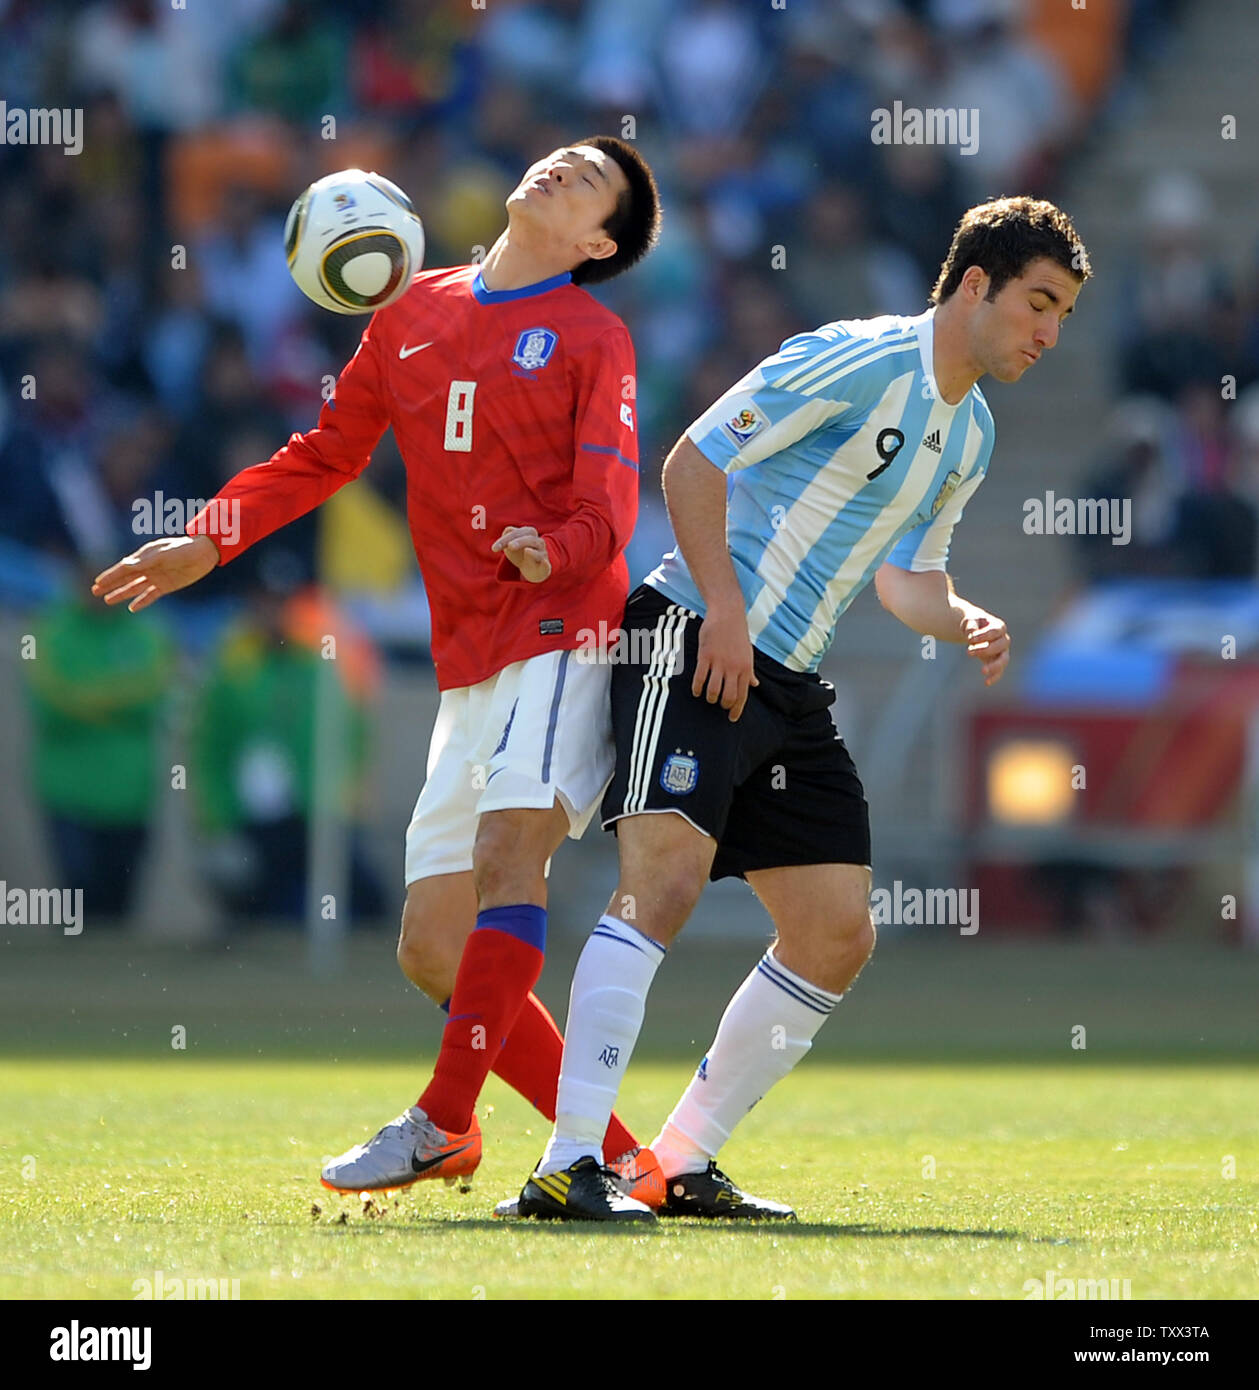 Gonzalo Higuain of Argentina and Kim Jung Woo of South Korea during the Group B match at Soccer City Stadium in Johannesburg, South Africa on June 17, 2010. UPI/Chris Brunskill Stock Photo